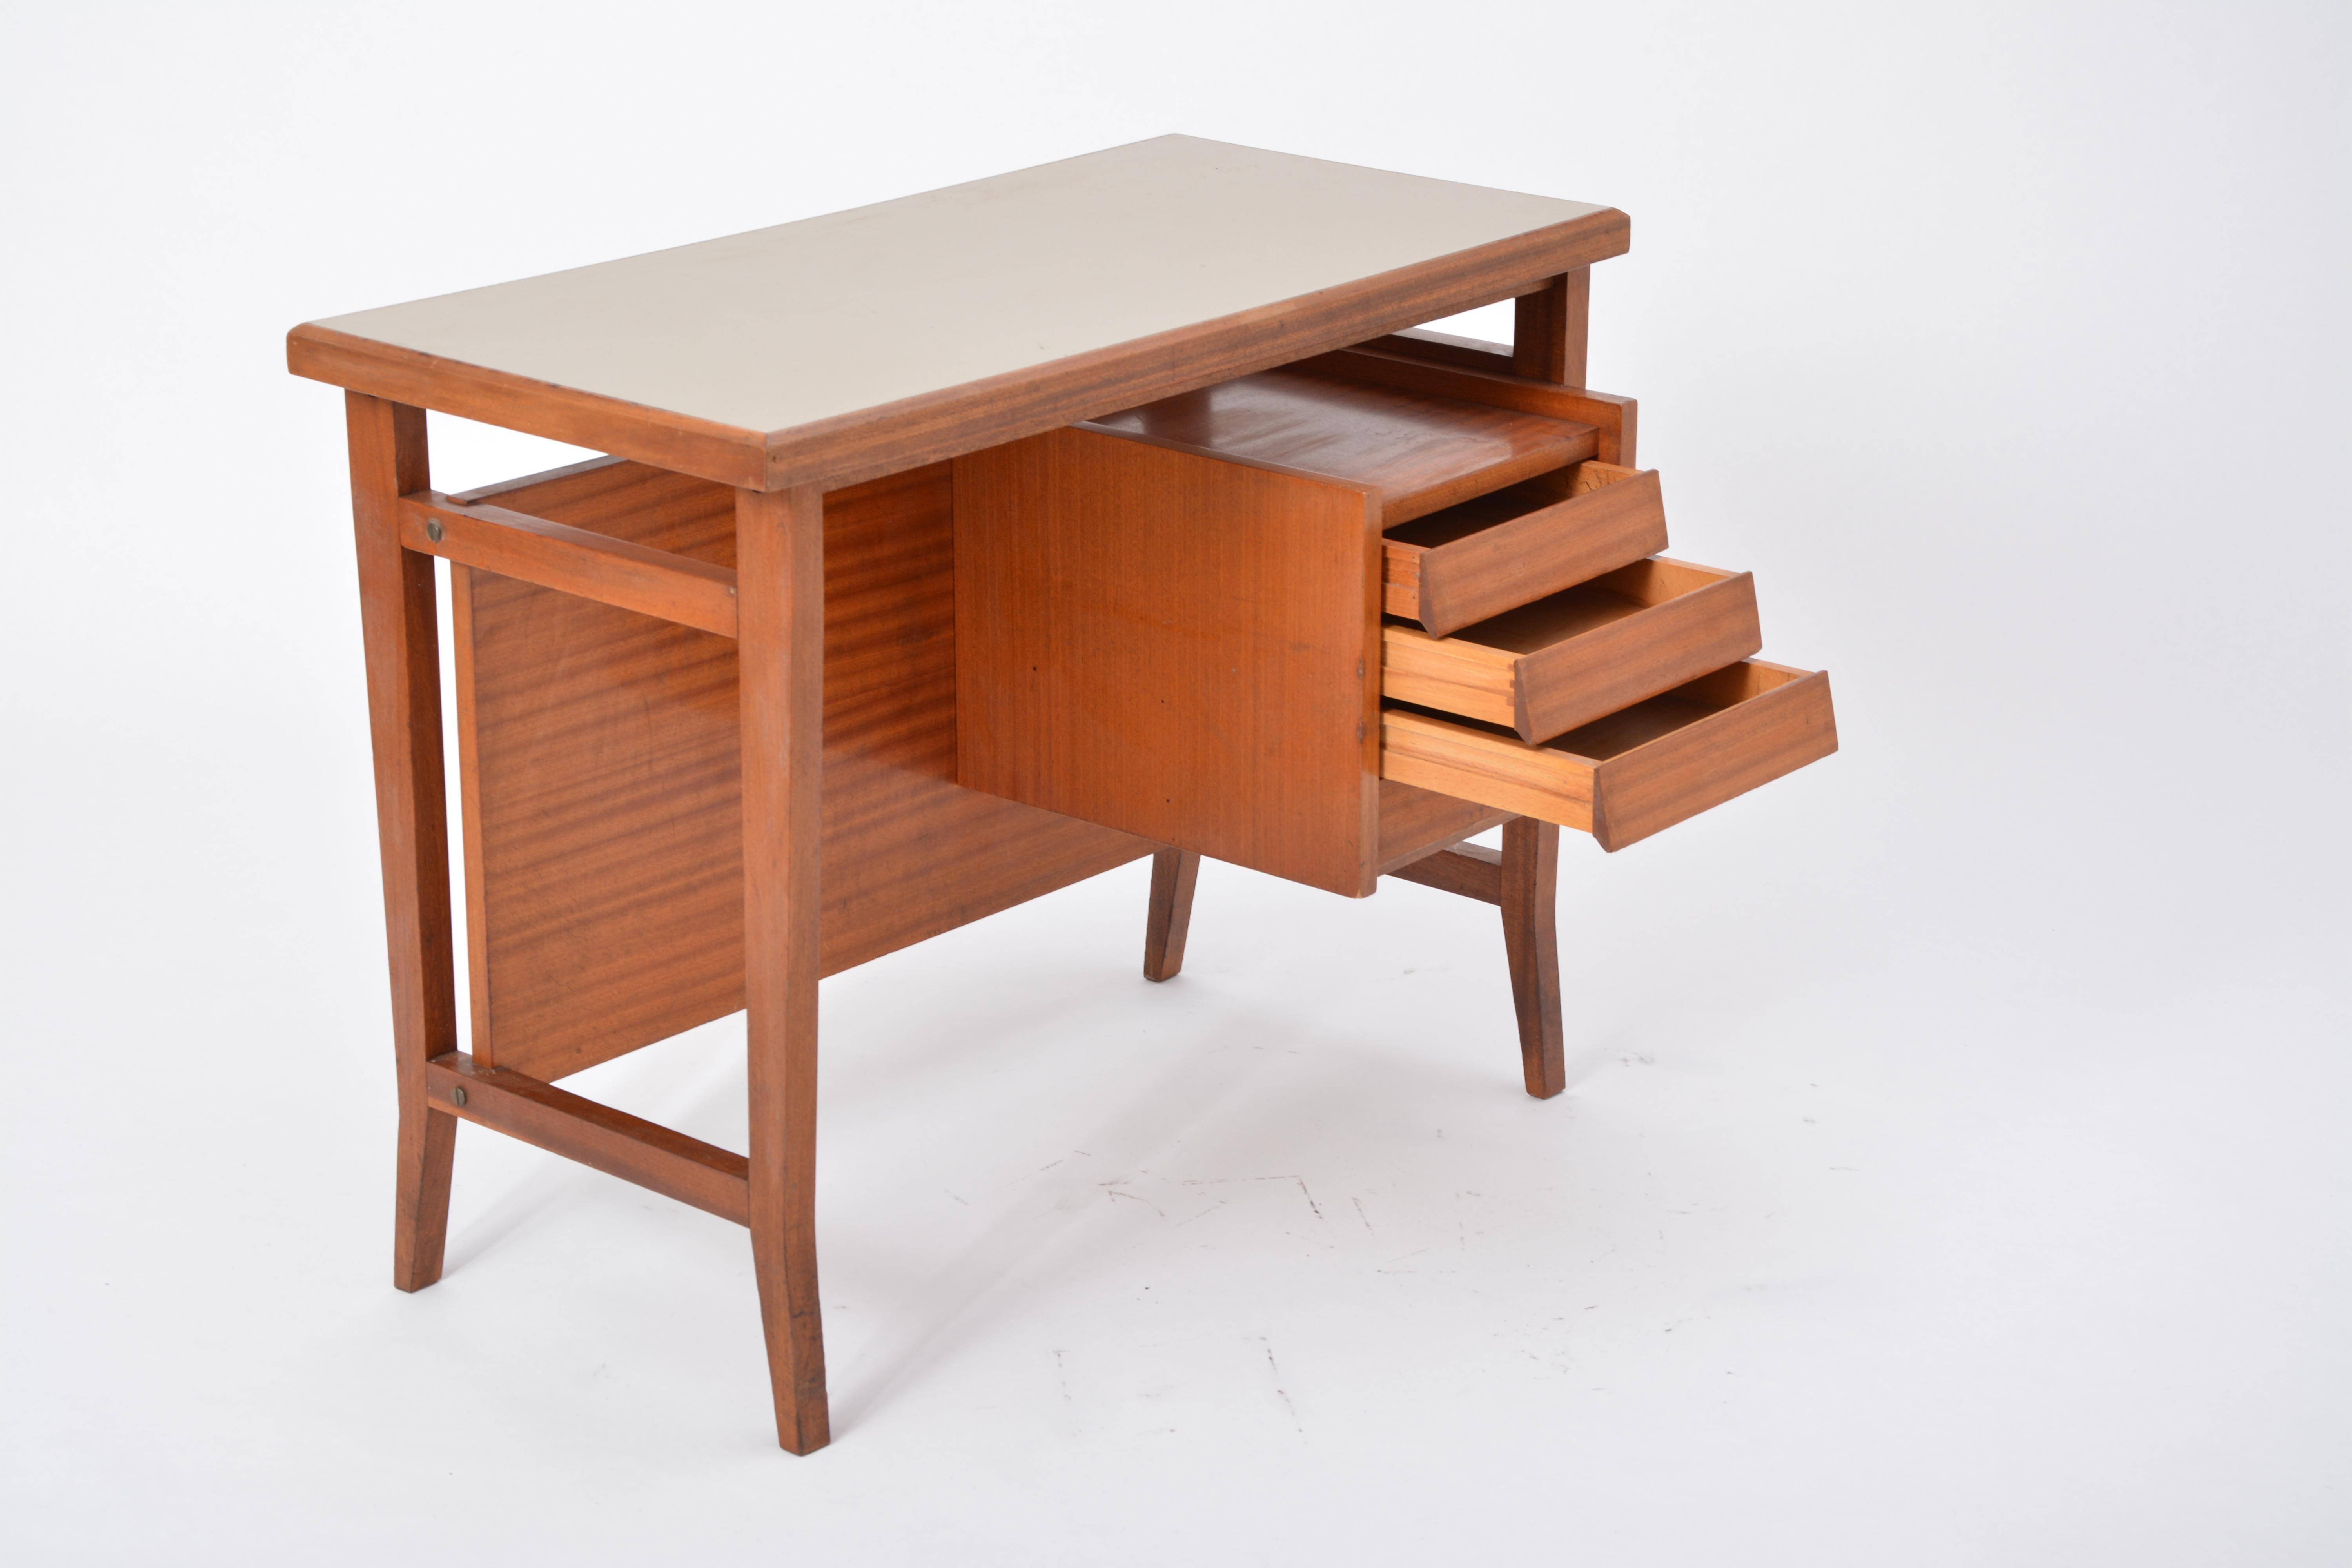 Small Writing Desk by Gio Ponti for Schirolli, Italy, 1960s (Holz)